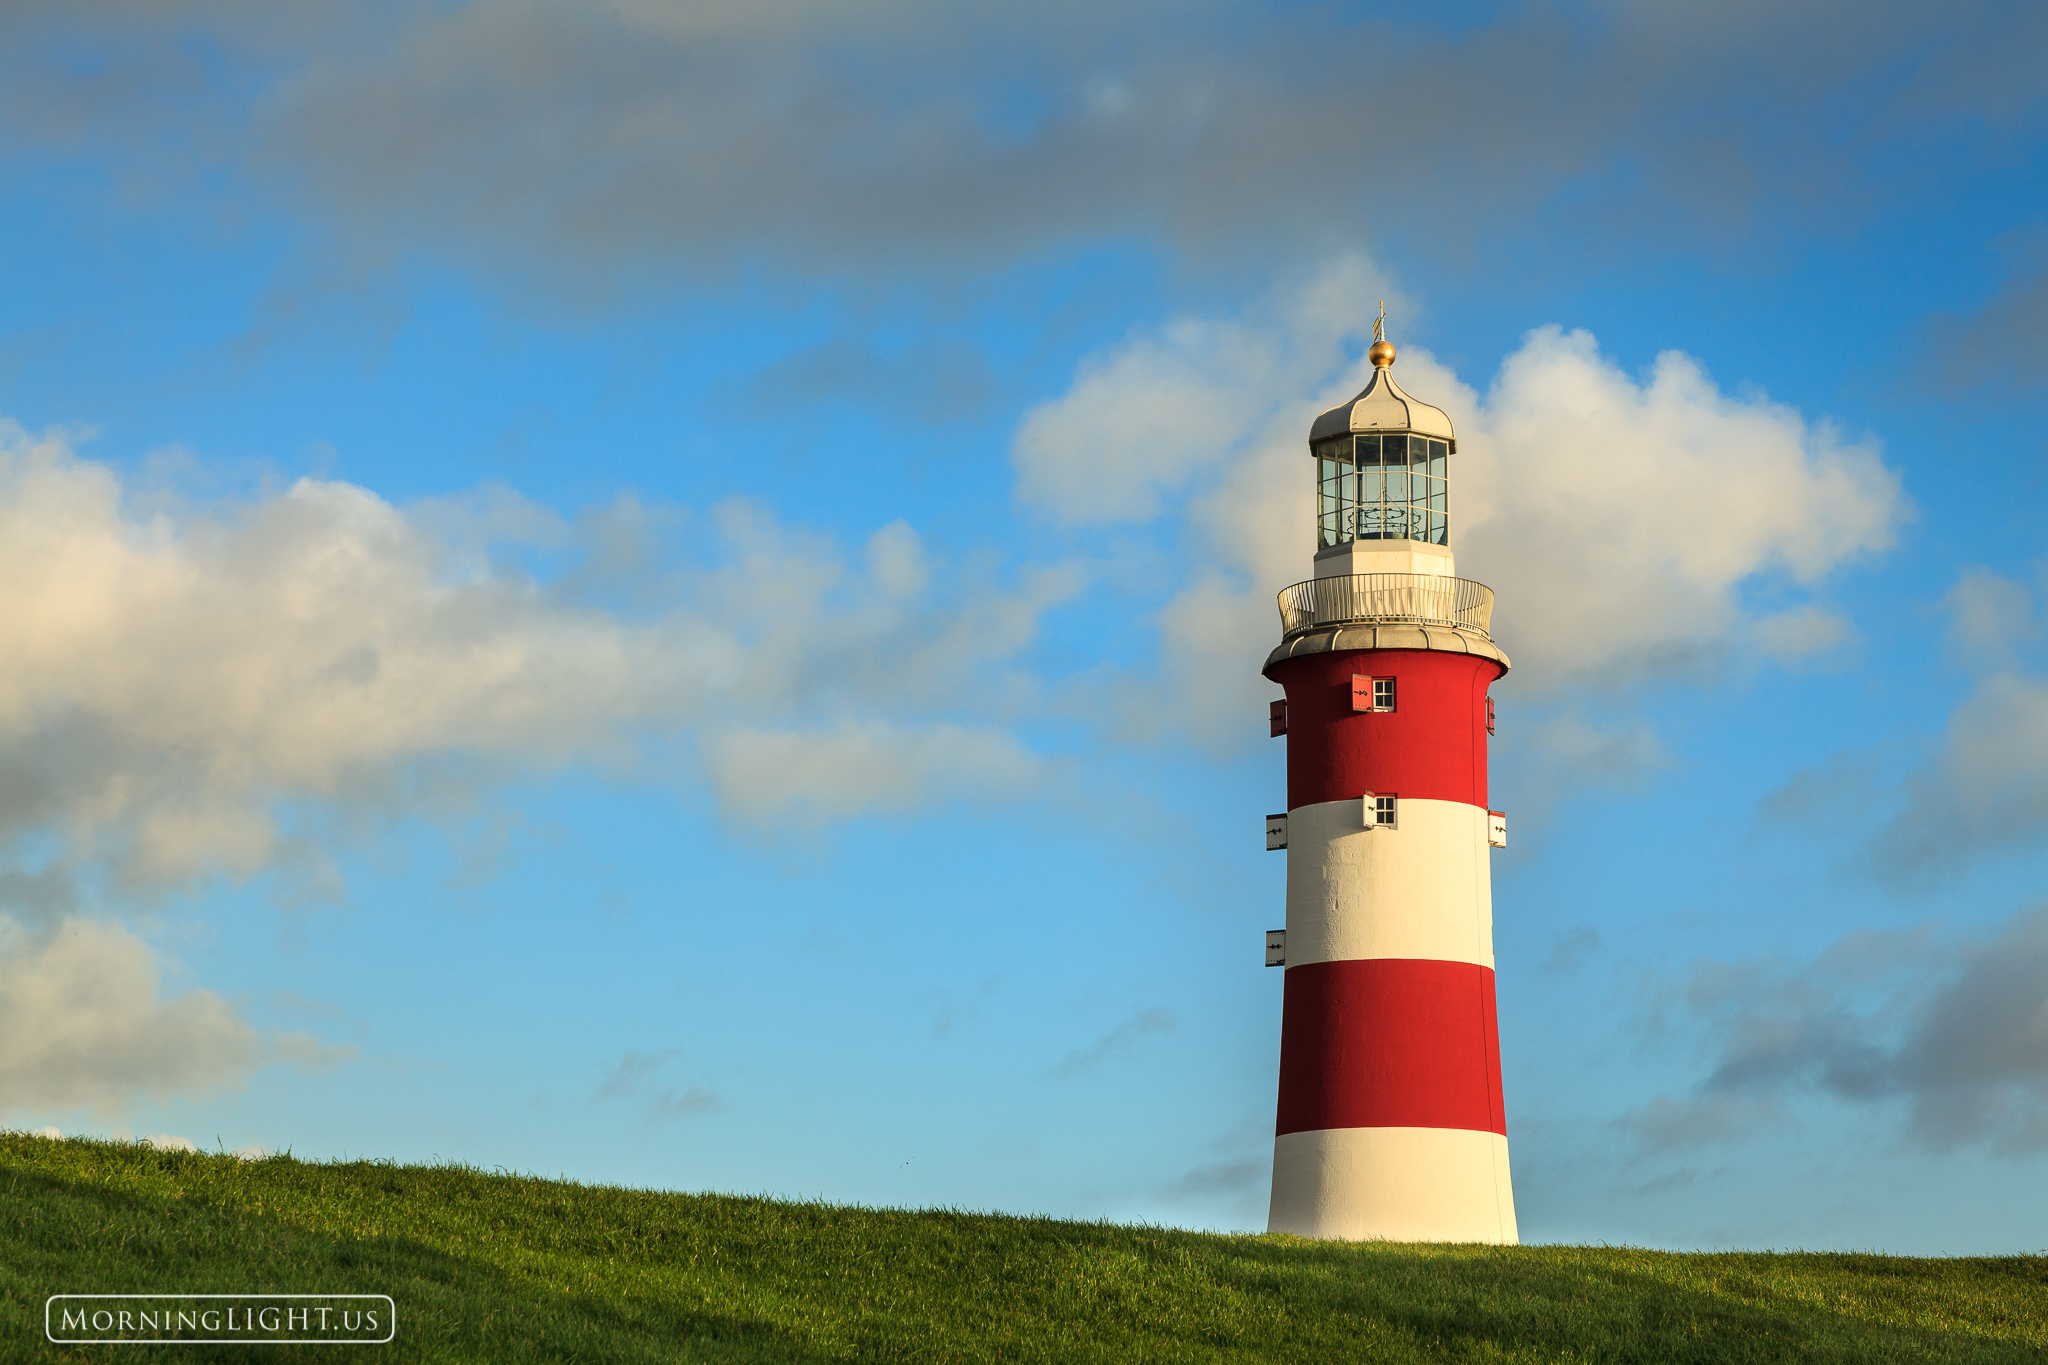 A red and white lighthouse stands above a grassy green field in Plymouth England.